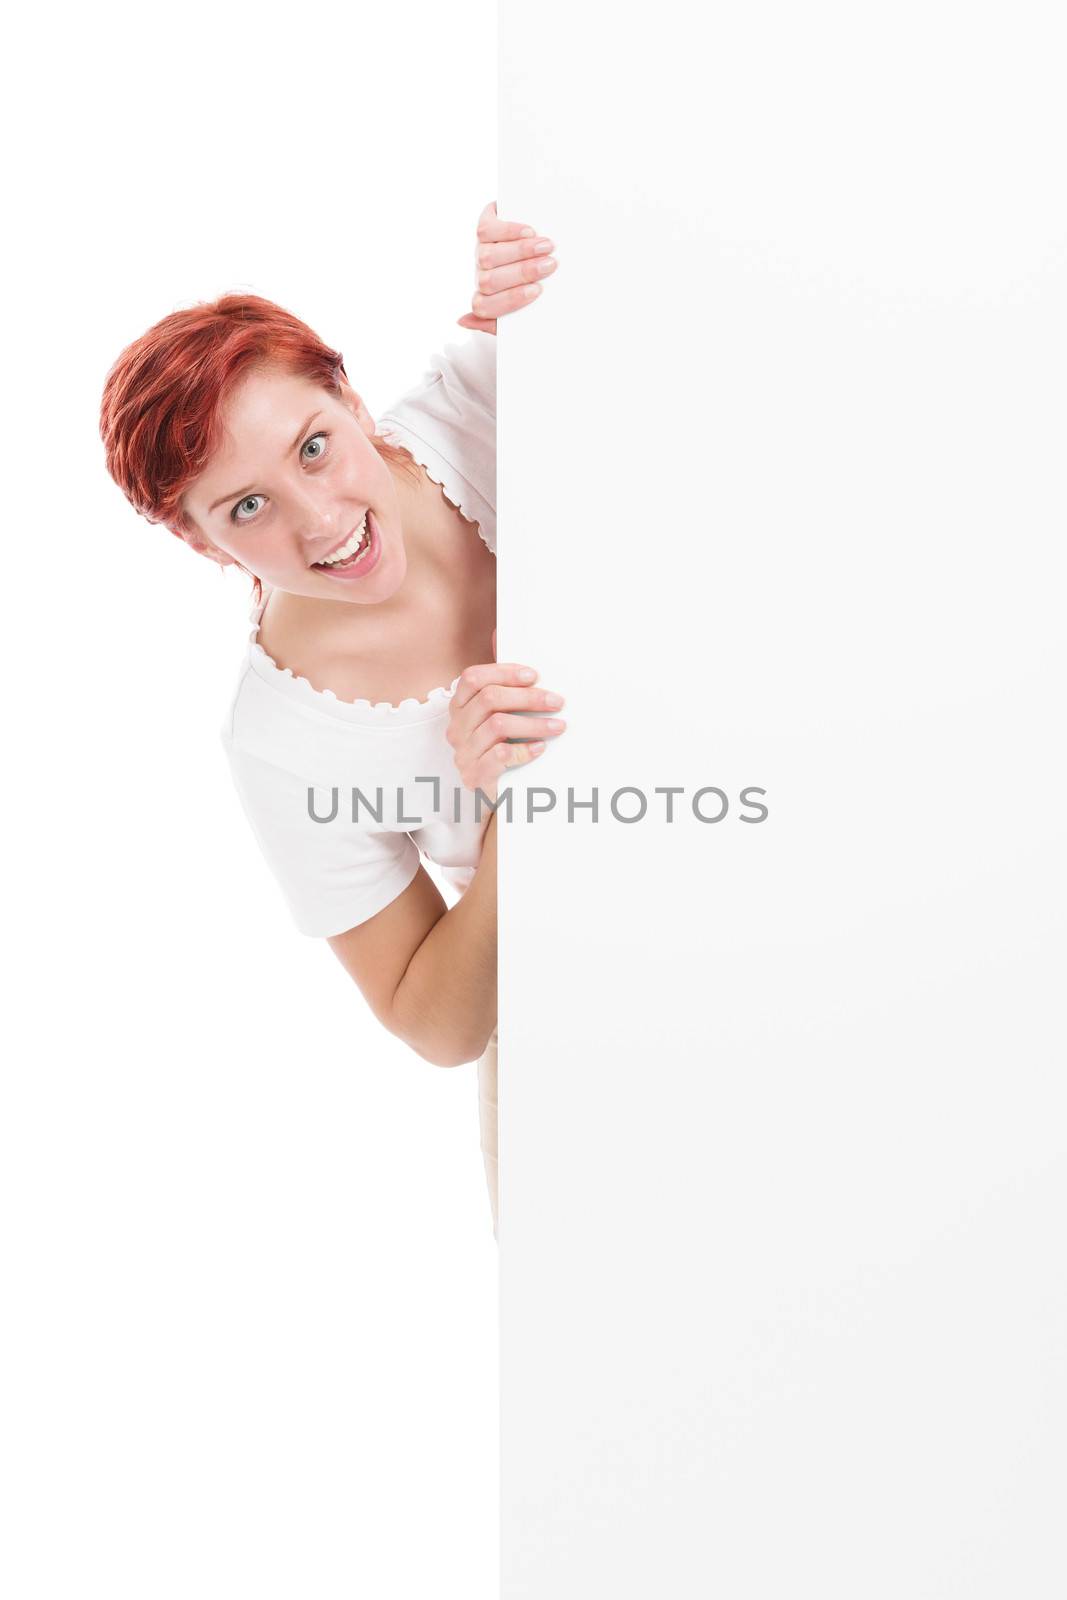 excited from behind white board by RobStark